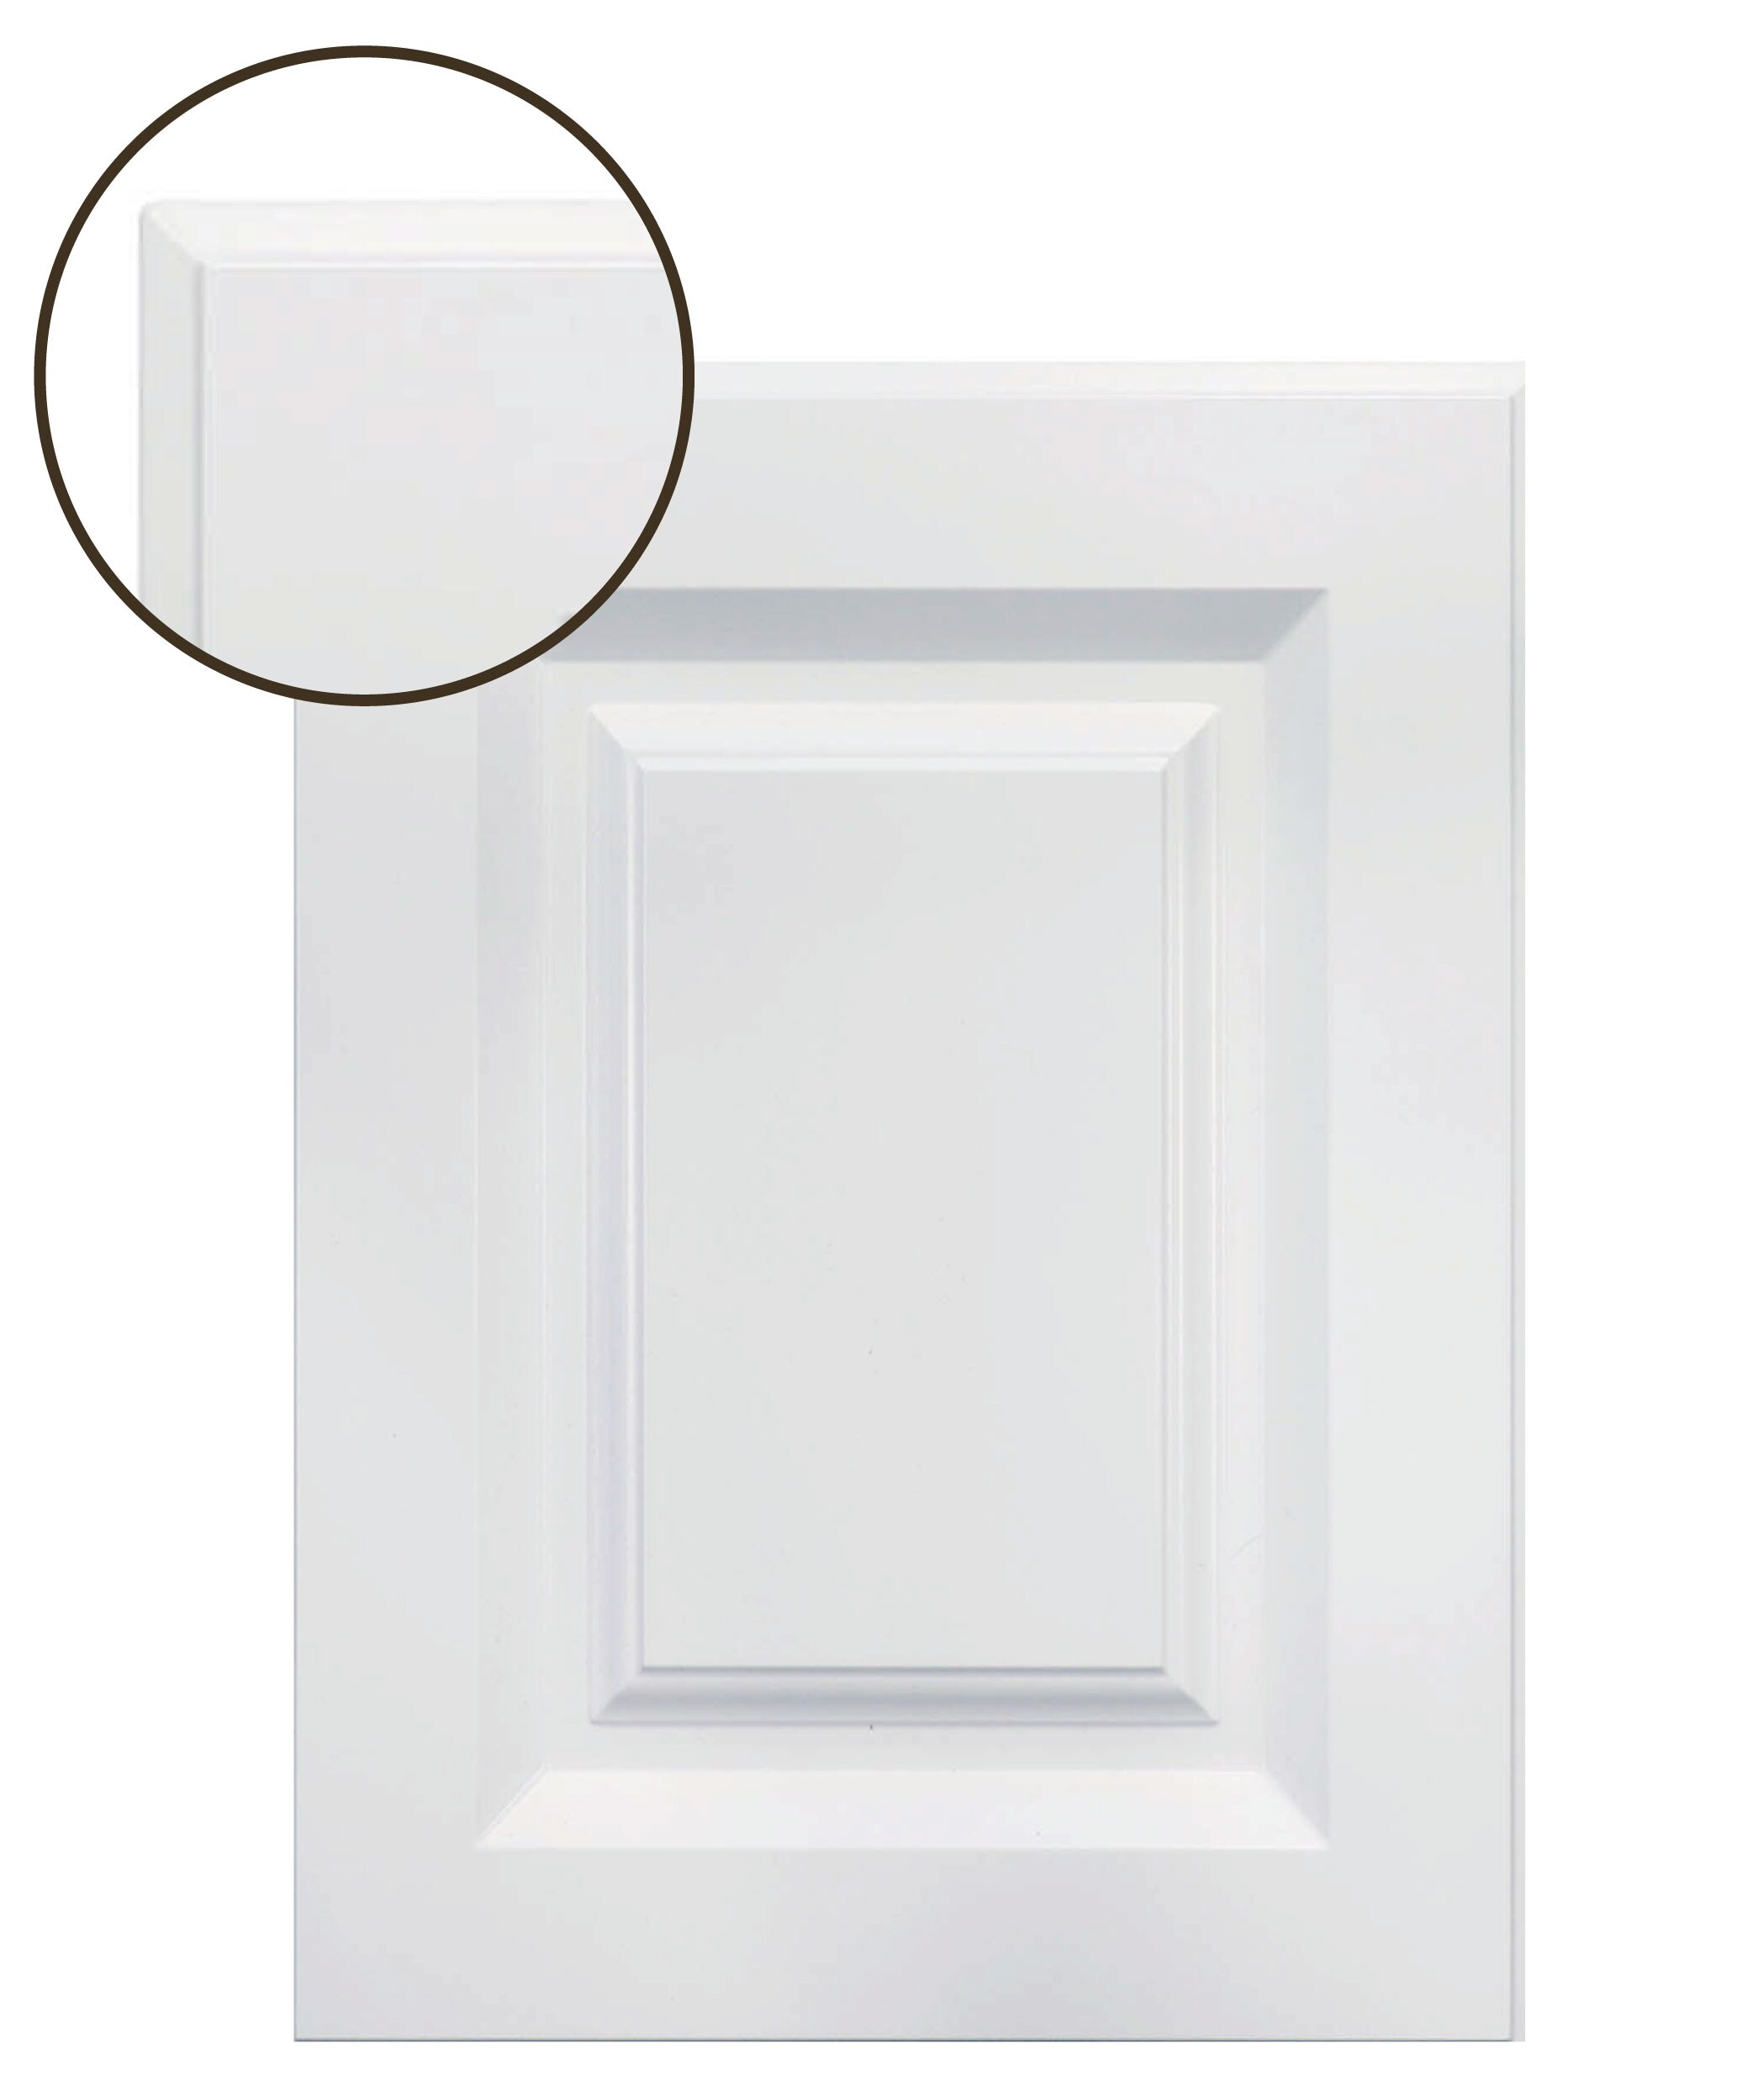 Surfaces 16 In W X 28 H Rigid Finished Square Wall Cabinet Door Fits 18 30 Box The Kitchen Doors Department At Lowes Com